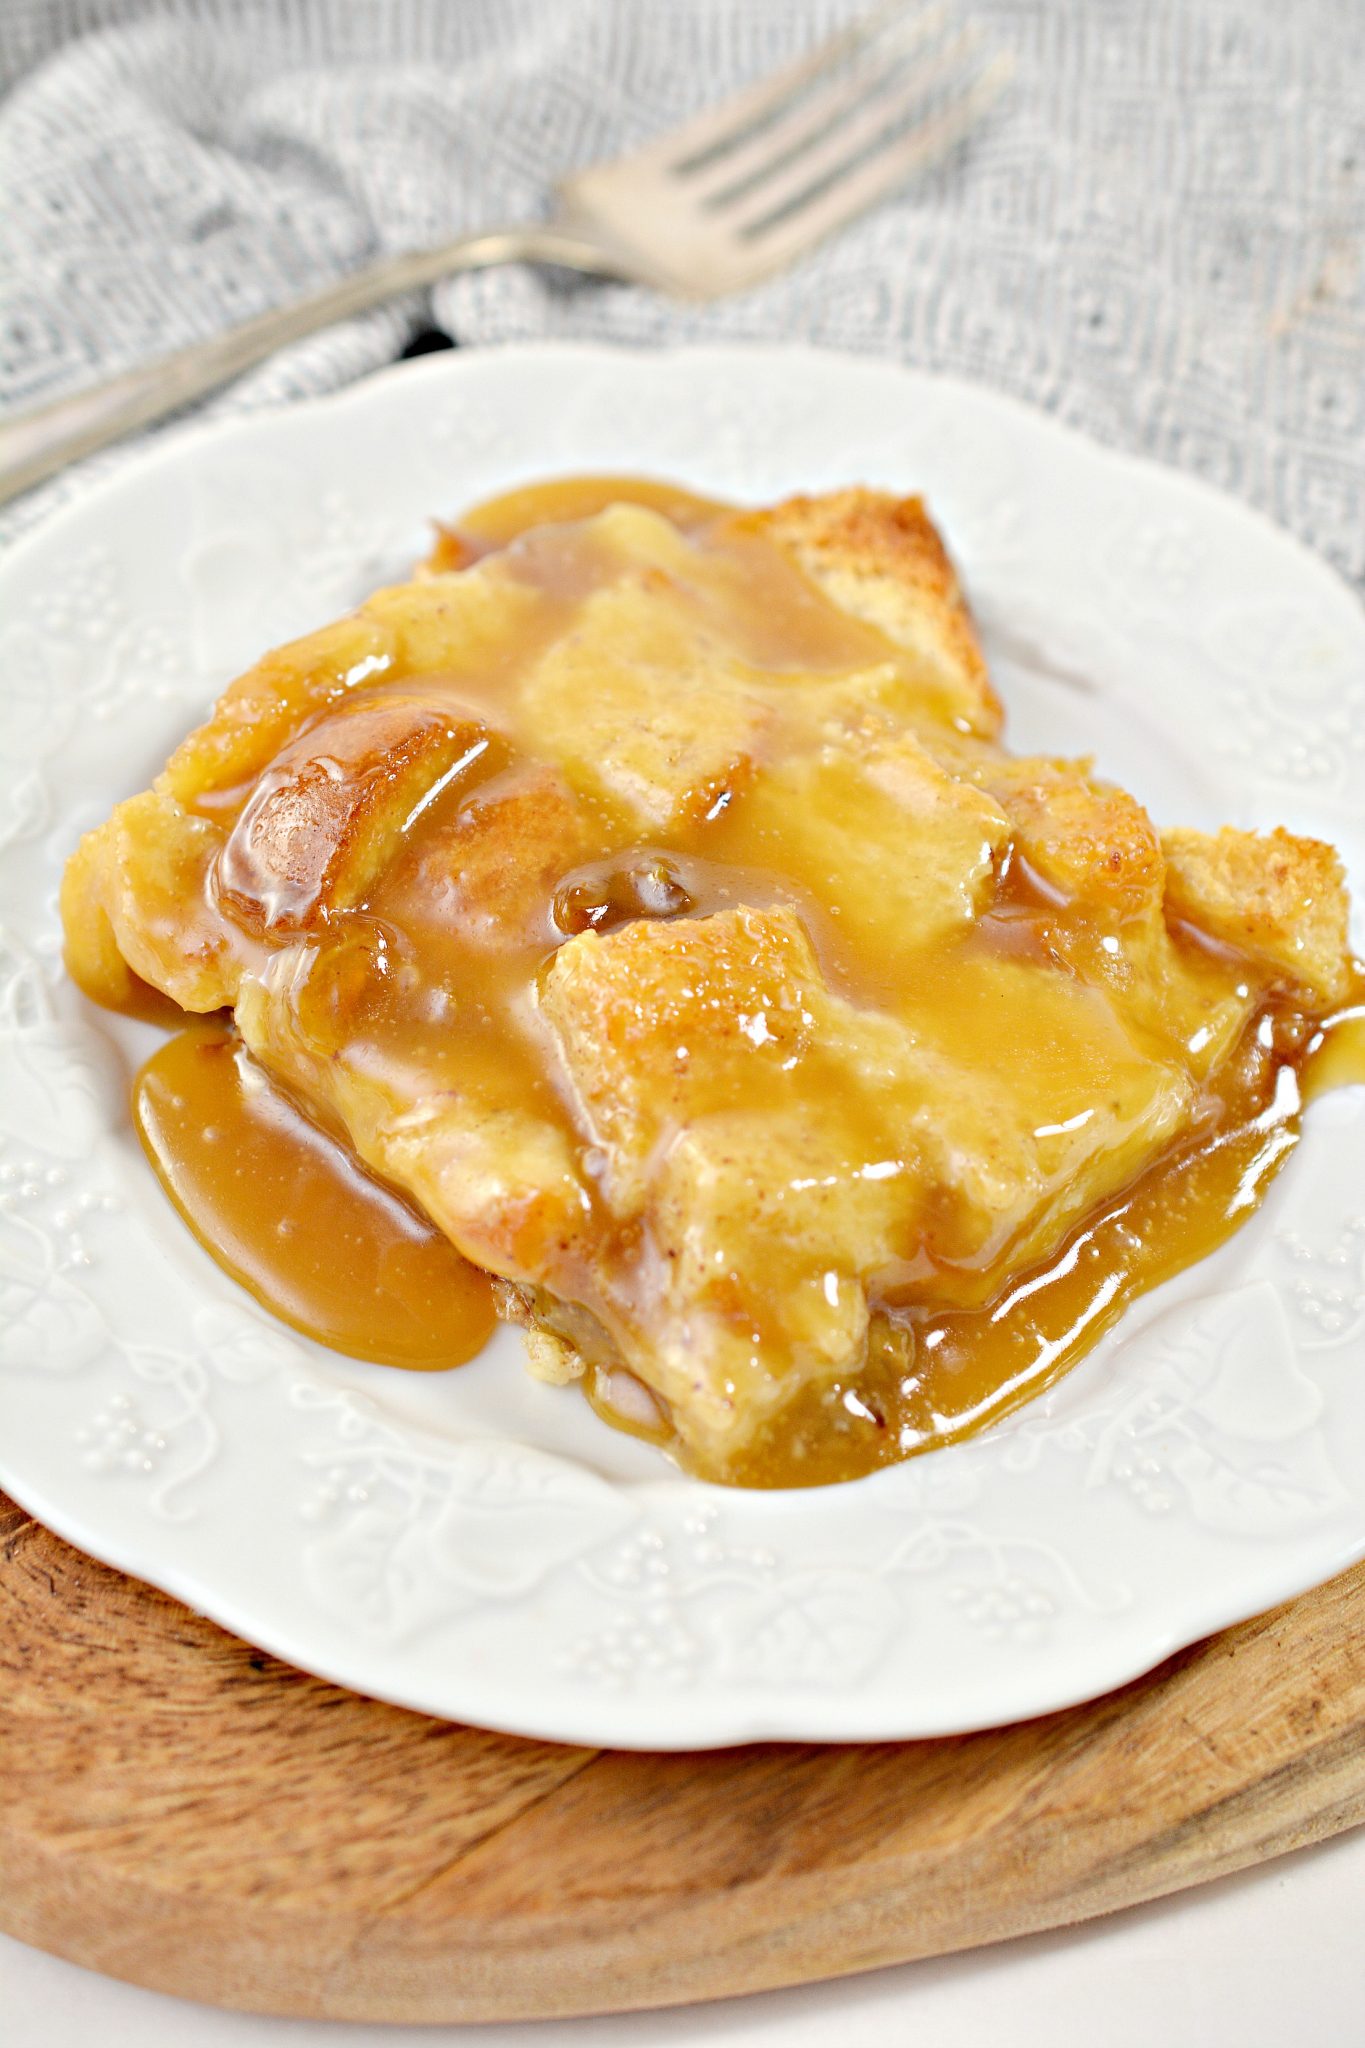 Old Fashioned Bread Pudding With Vanilla Sauce 2 1365x2048 